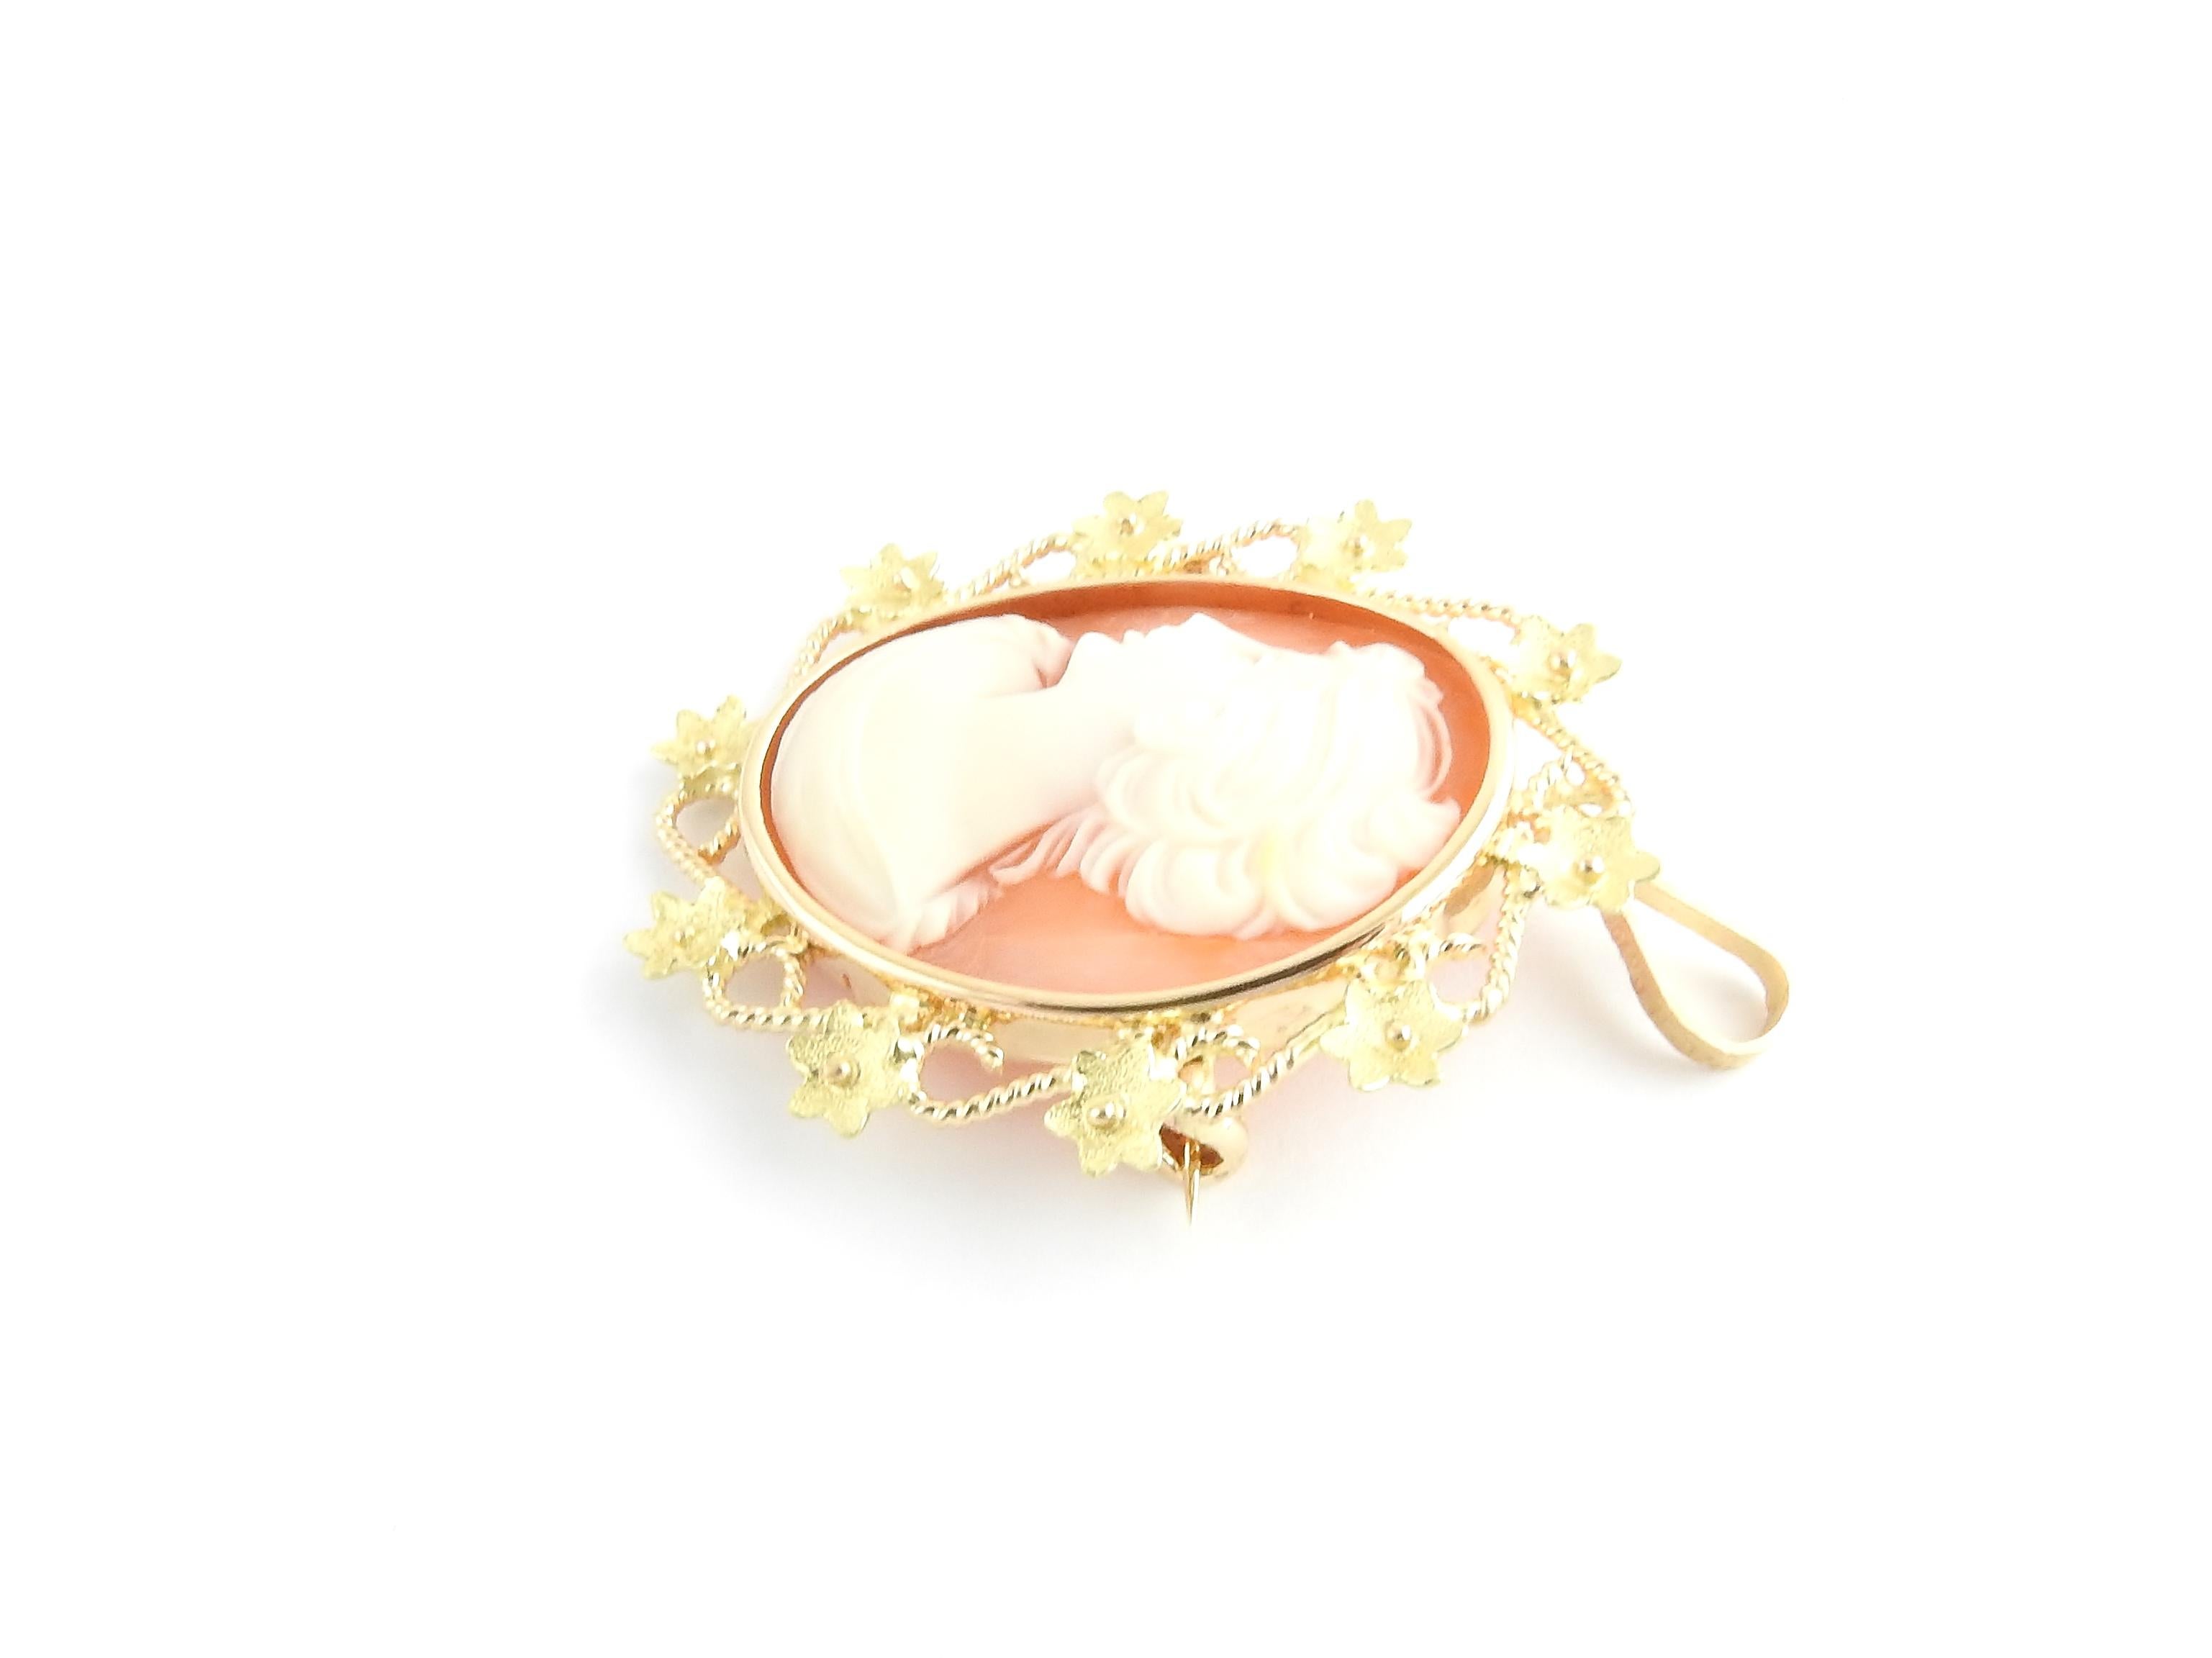 Vintage 18 Karat Yellow Gold Cameo Brooch/Pendant

This lovely cameo features a lovely lady in profile framed in beautifully detailed 18K yellow gold. Can be worn as a brooch or a pendant.

Size: 40 mm x 37 mm

Weight: 6.4 dwt. / 10.0 gr.

Stamped: